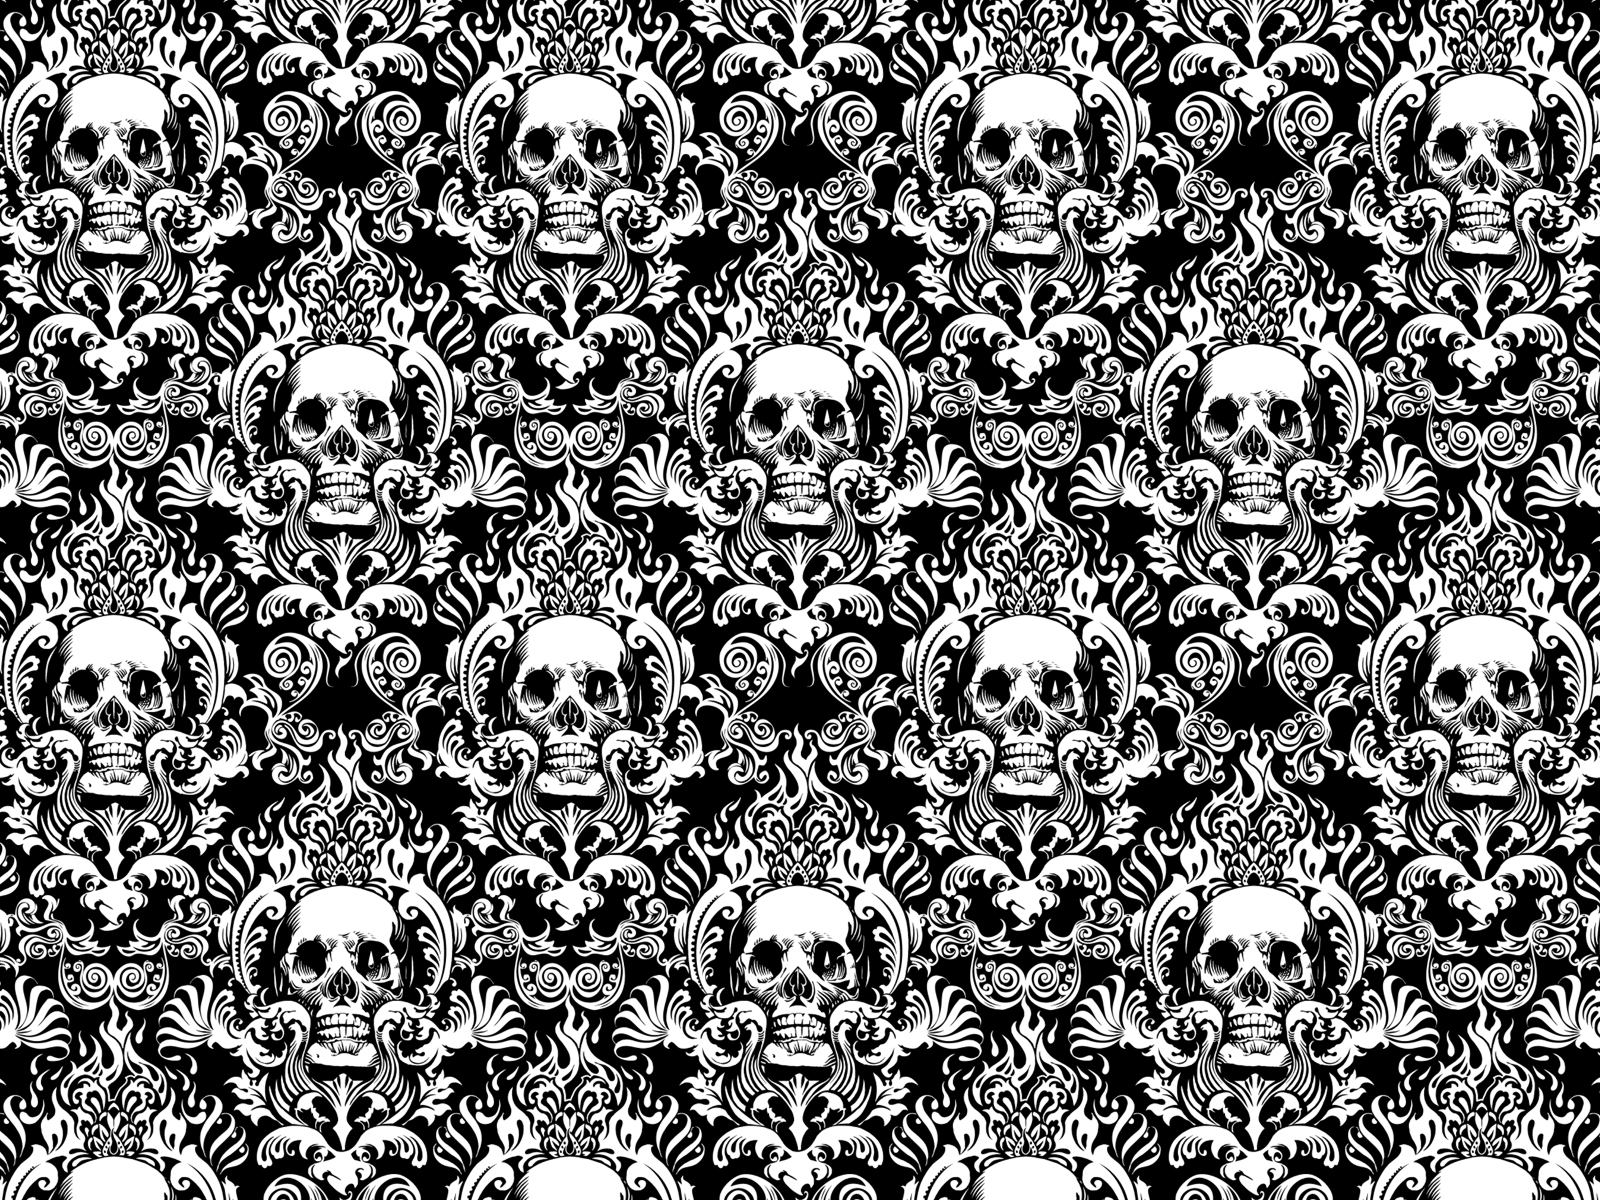 Jimiyo Inspired By Damask Style Wallpaper Made One Will Black